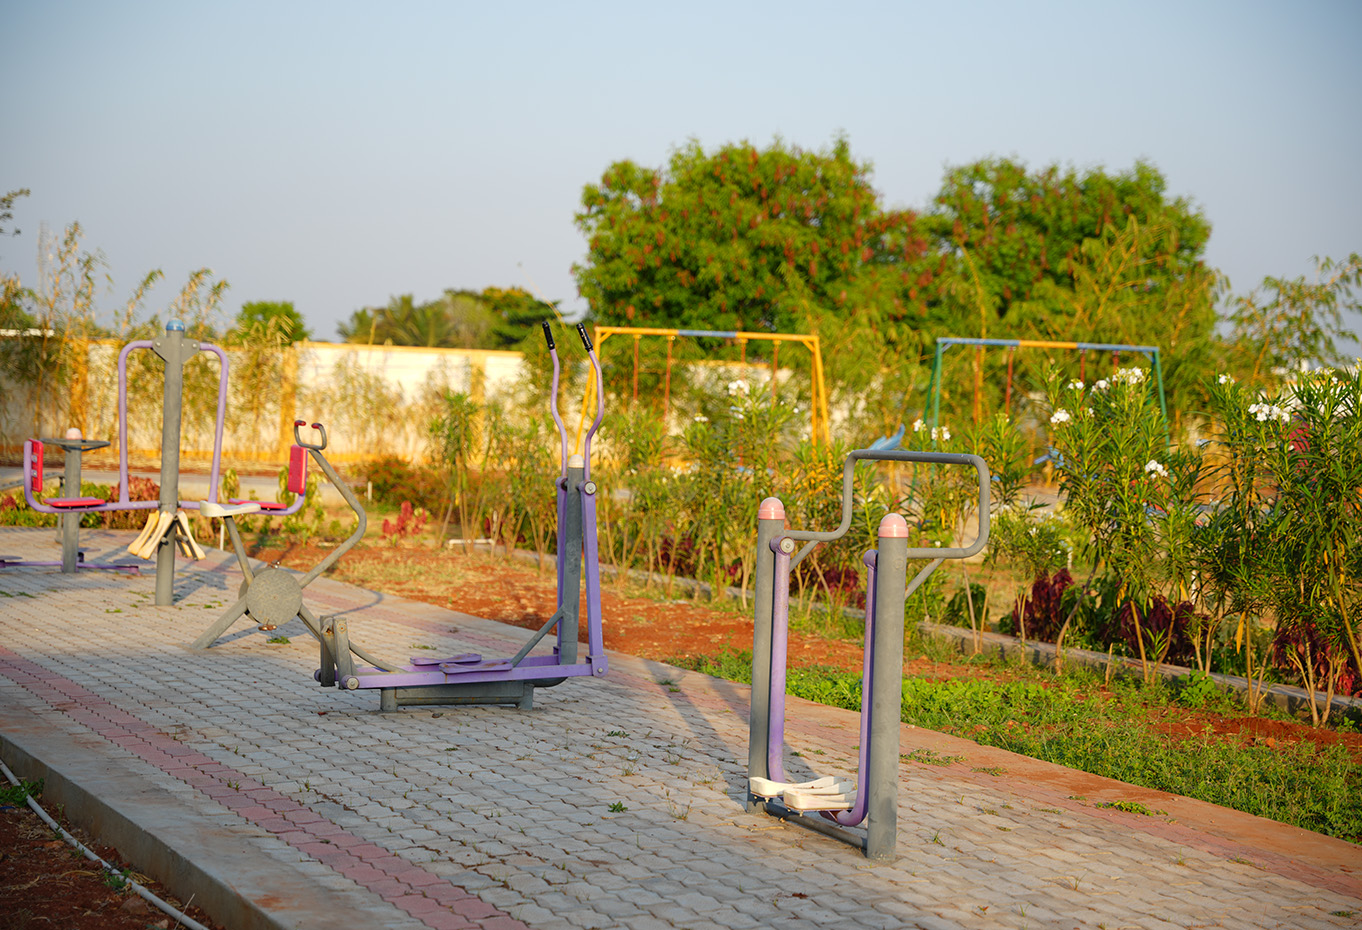 Coral residency images - Green Field Housing India